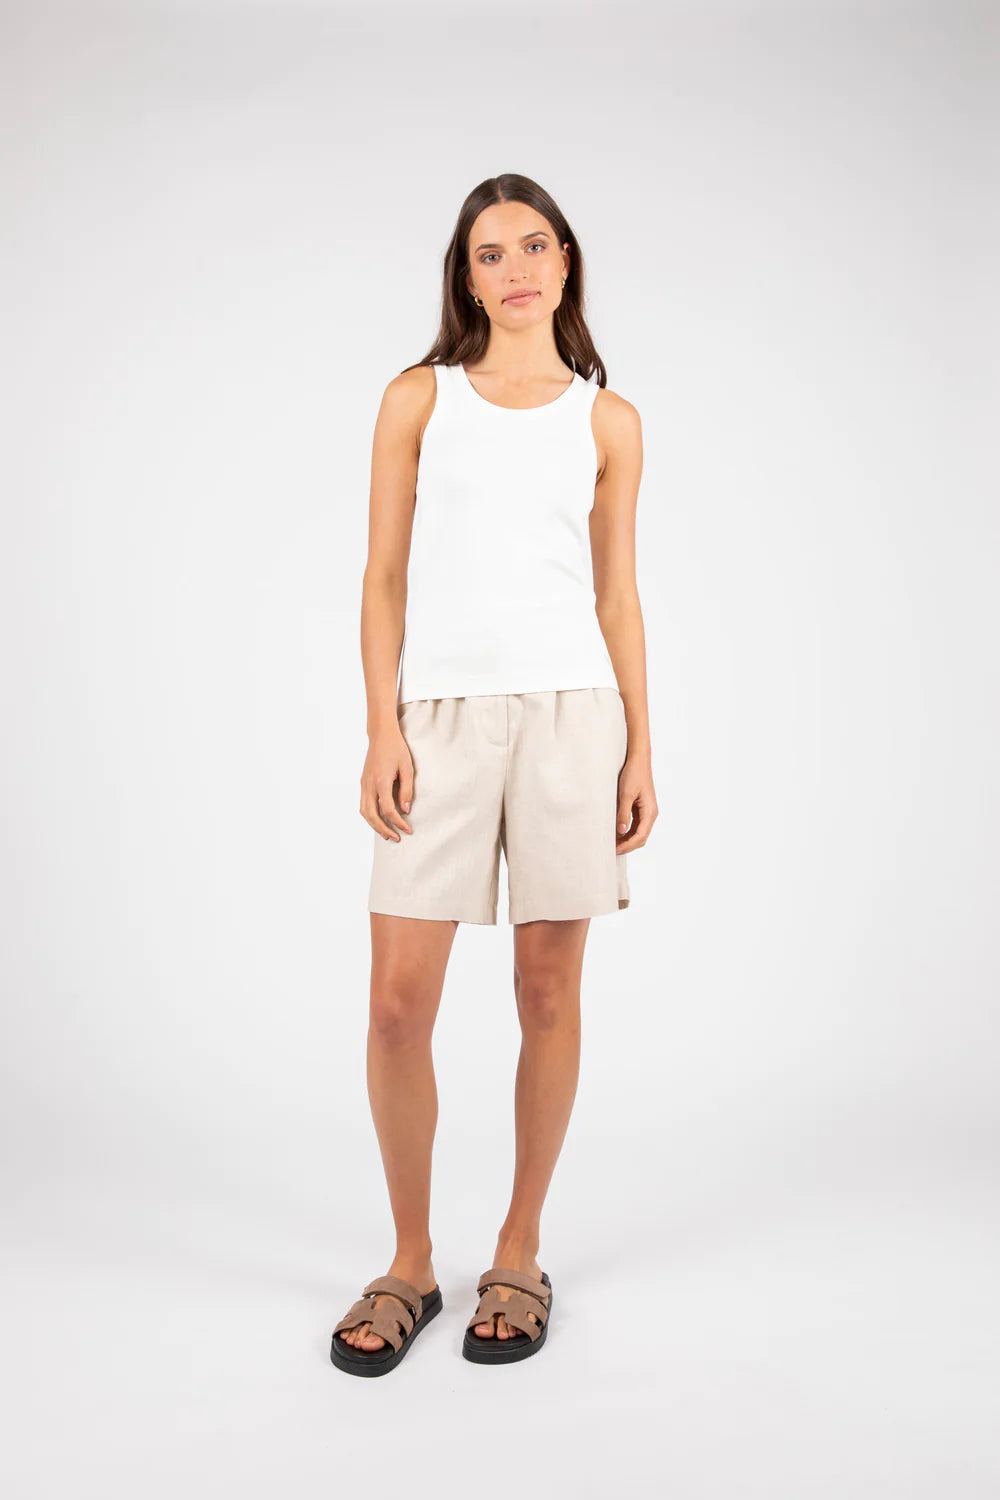 Marlow - Step Up Tank - White